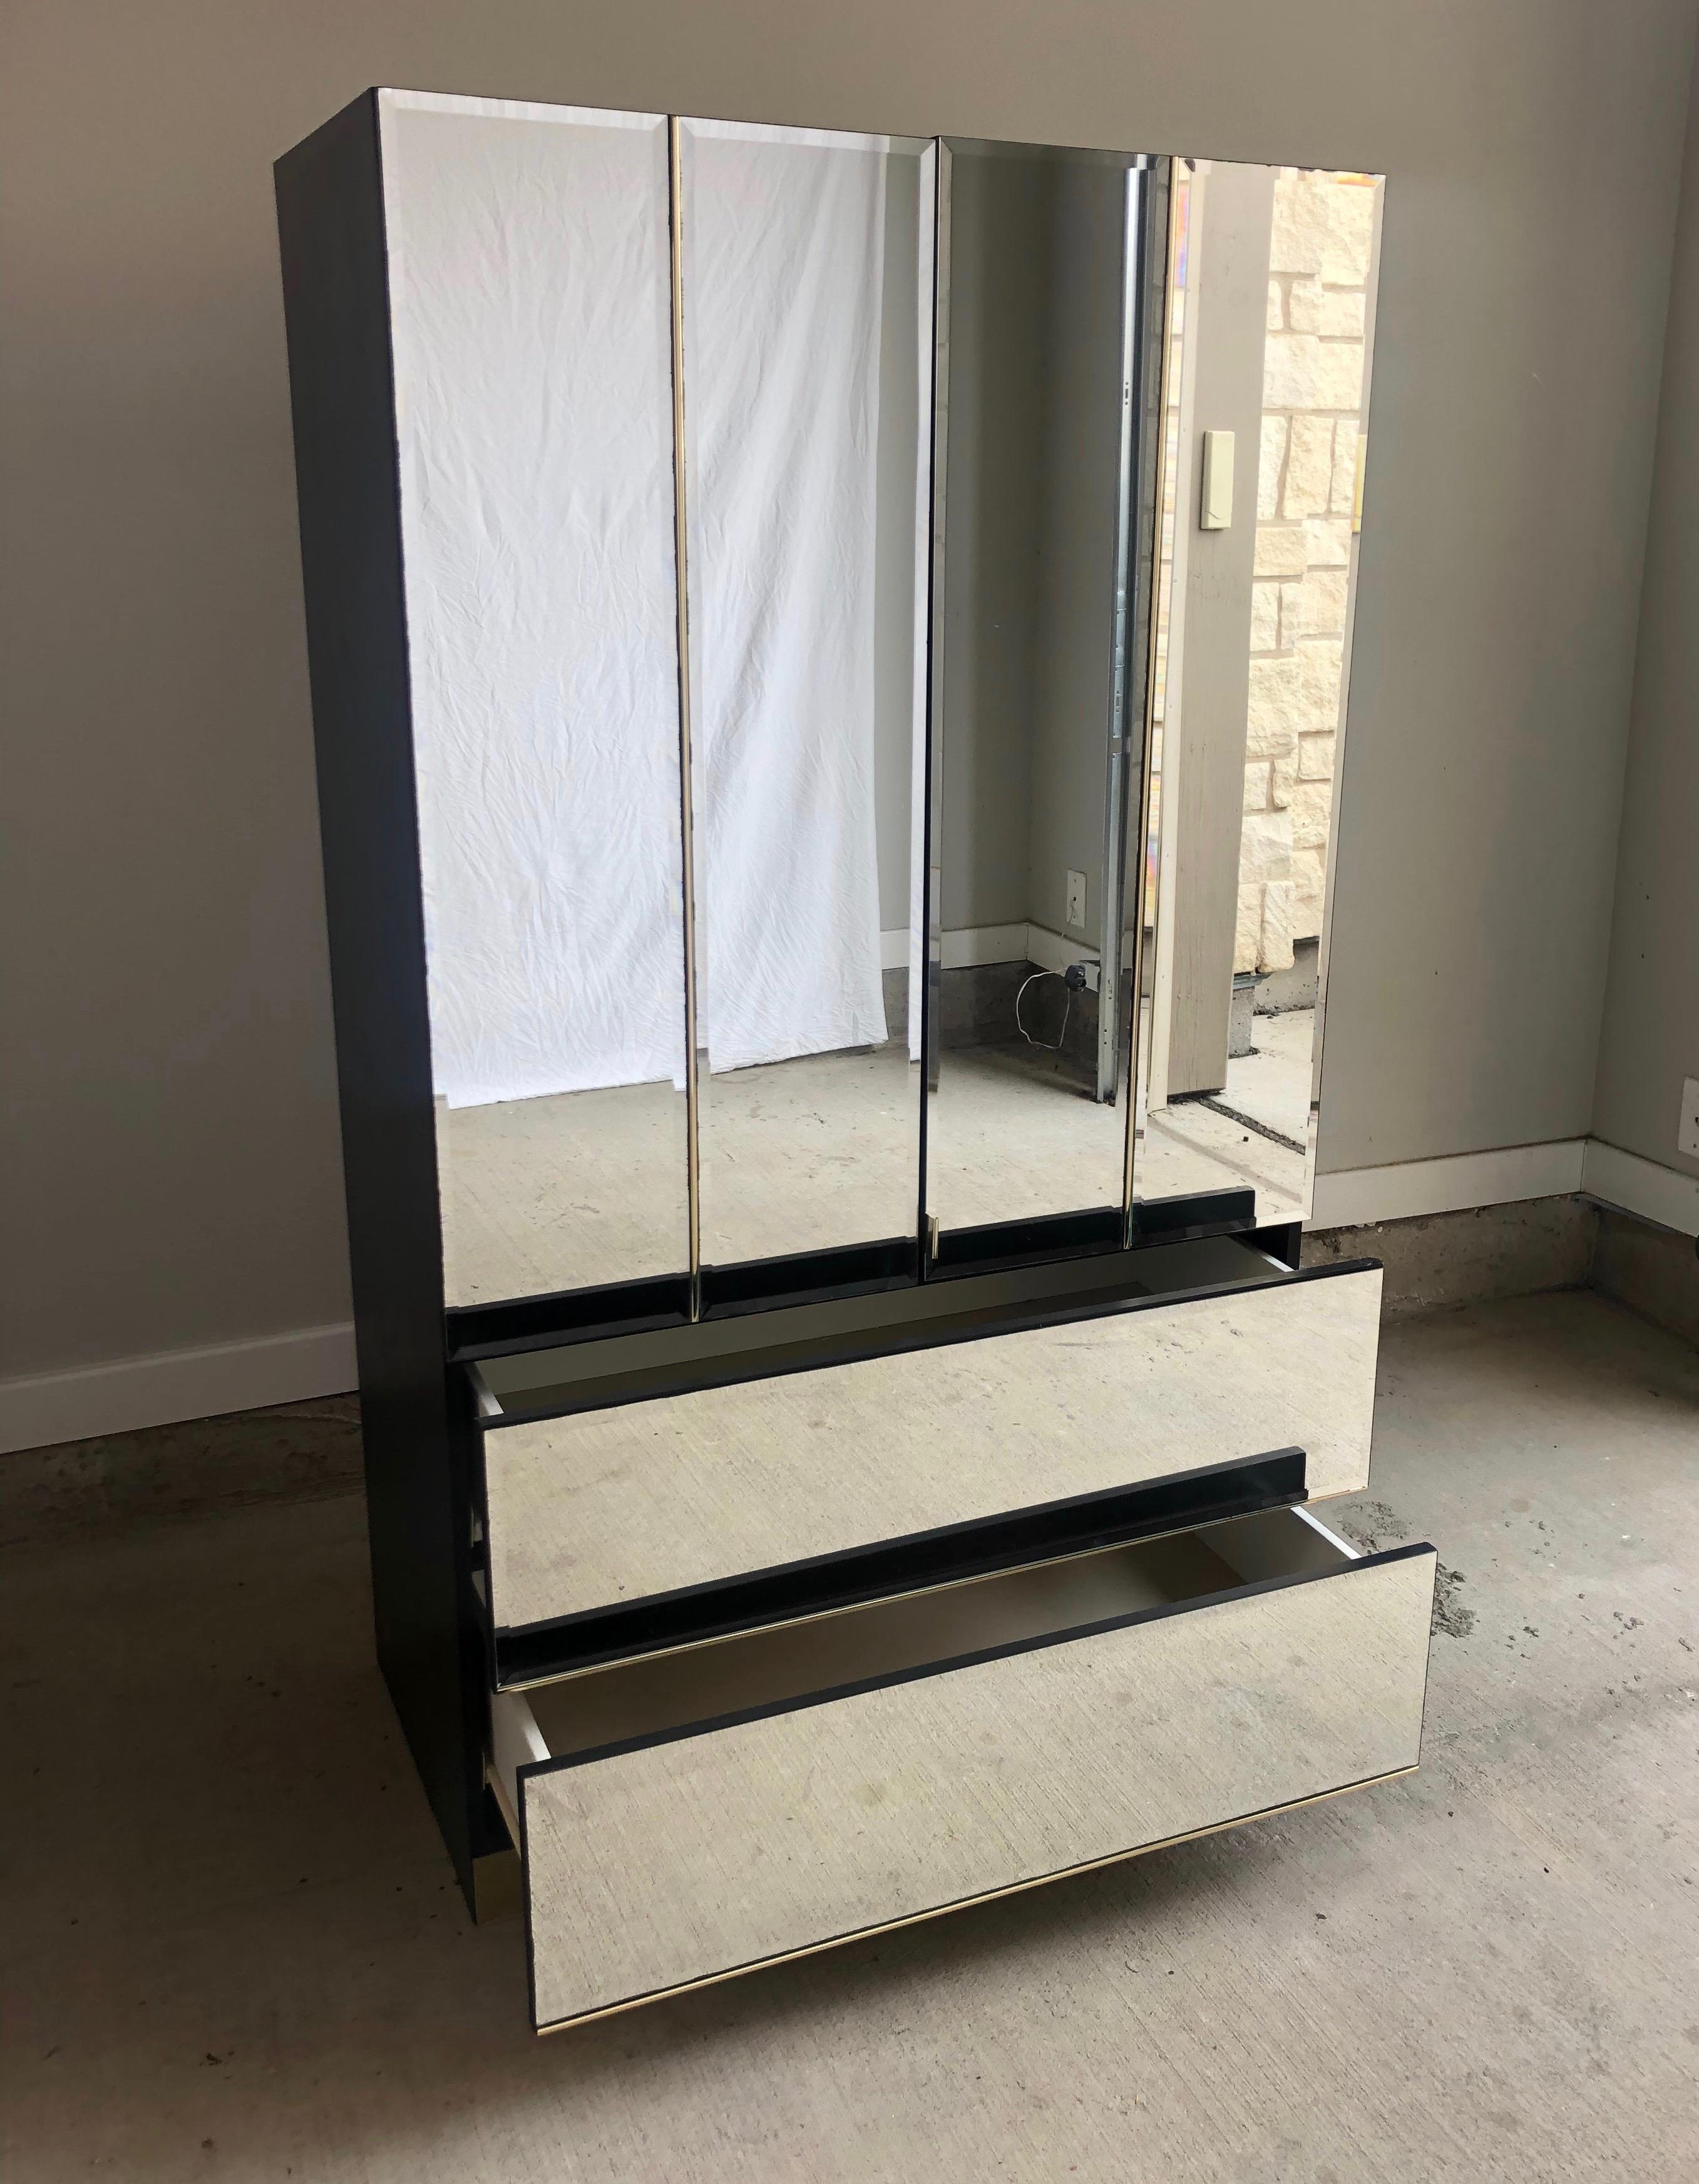 1980s Mirrored Armoire In Good Condition For Sale In Denton, TX